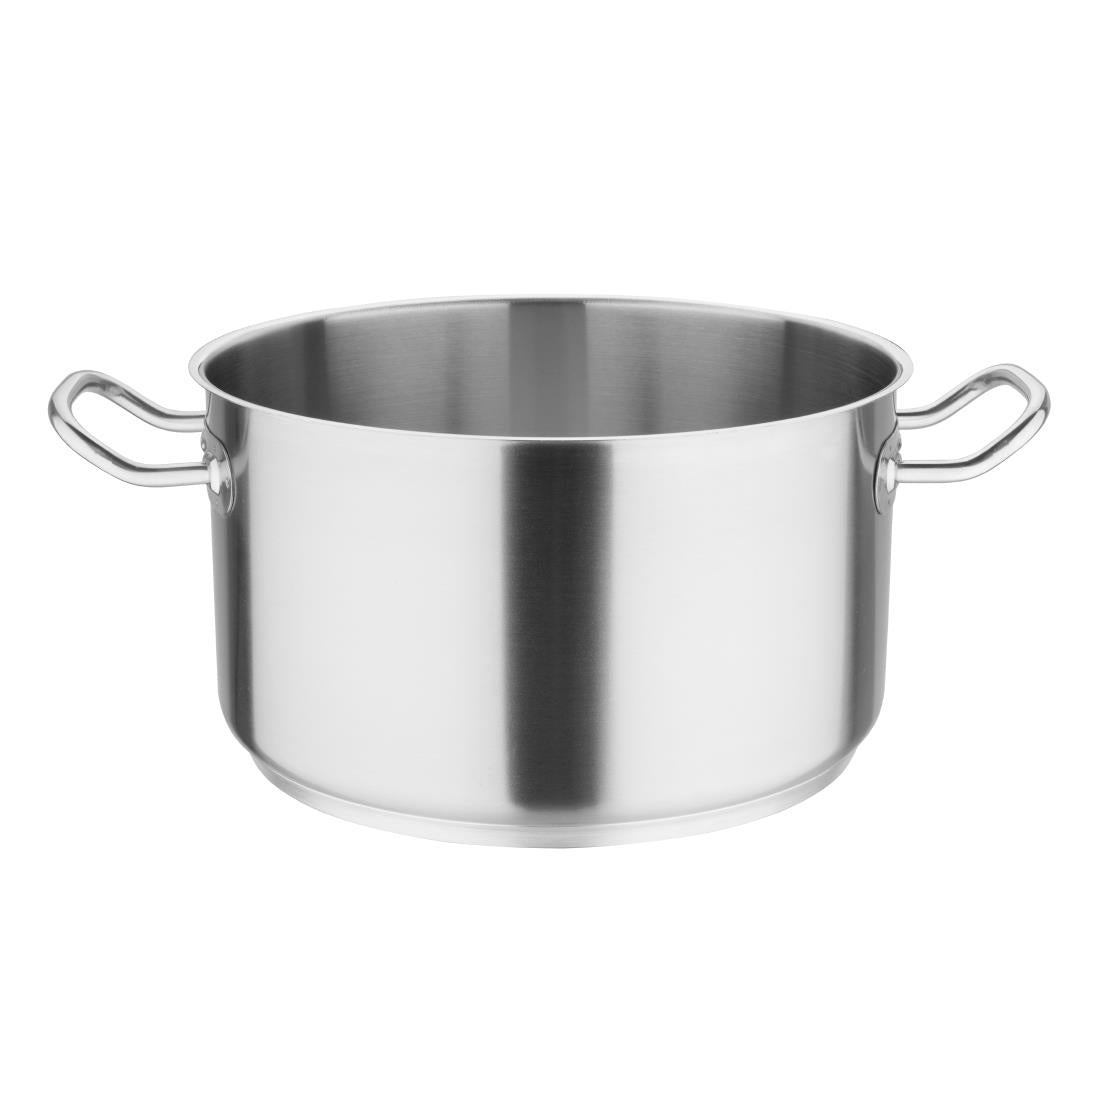 M941 Vogue Stainless Steel Stew pan 9.5Ltr